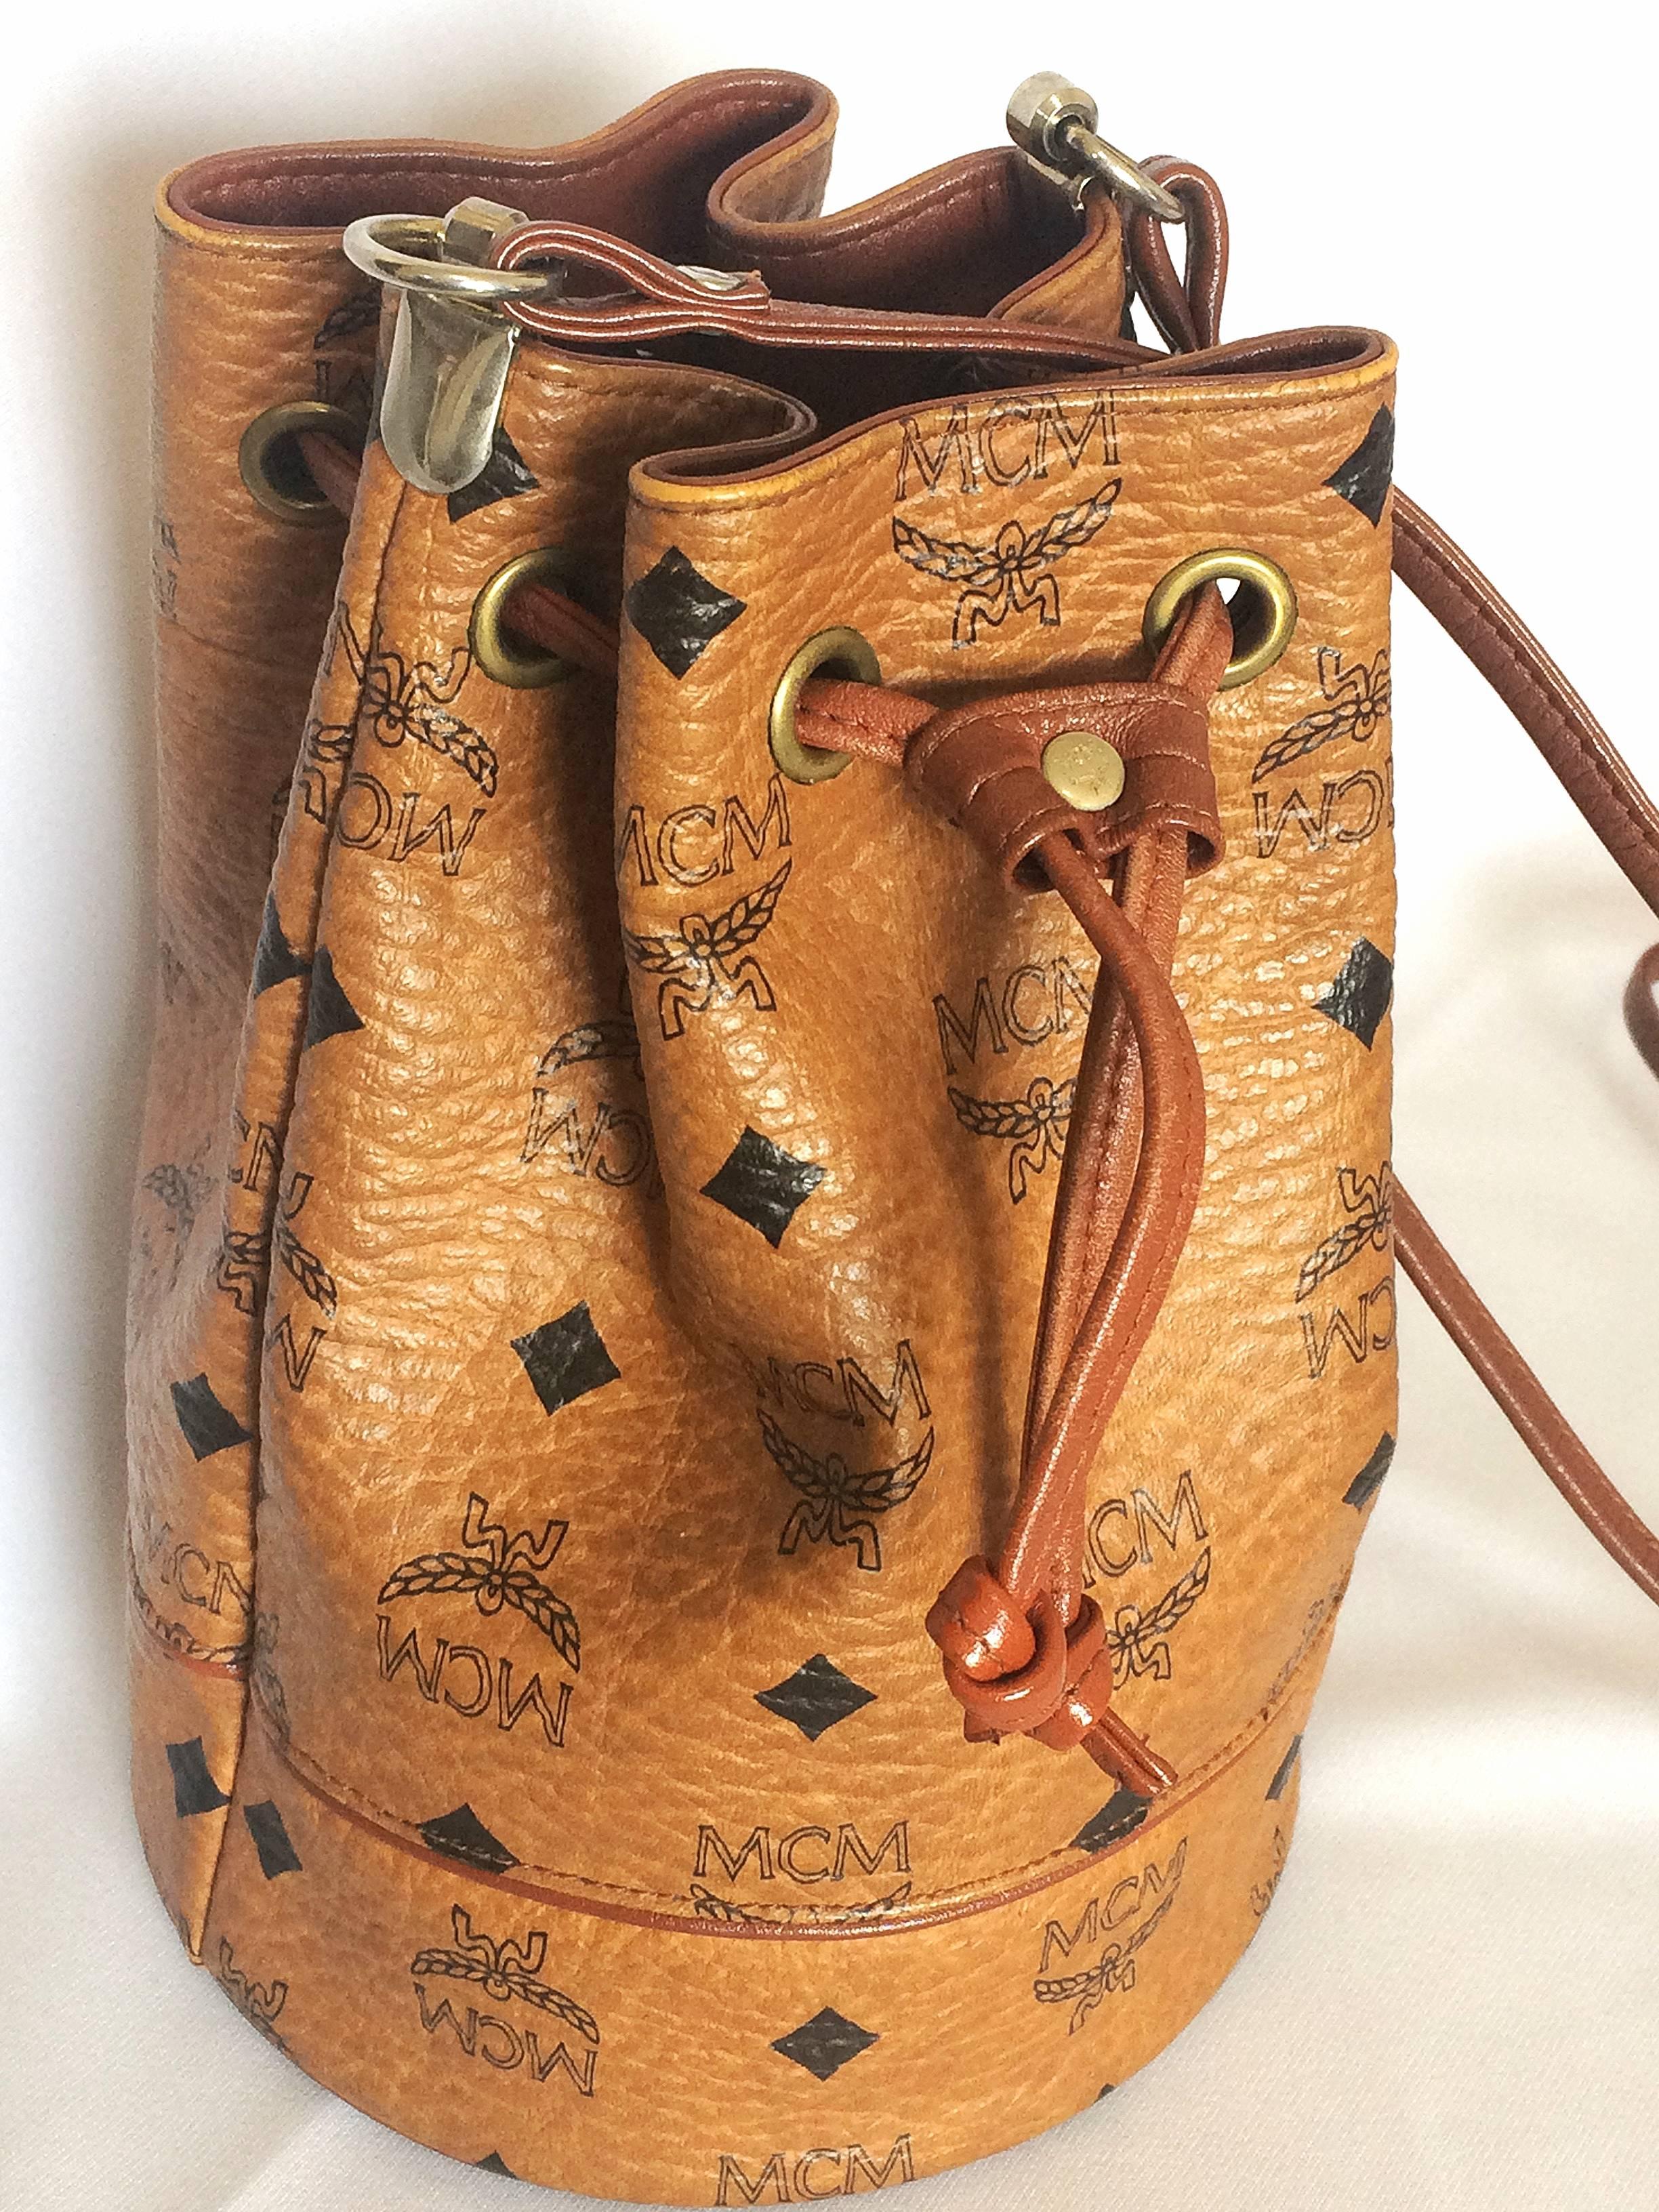 1990s. Vintage MCM brown monogram small hobo bucket bag. mini purse. So chic and cute. Designed by Michael Cromer.

MCM has been back in the fashion trend again!!
Now it's considered to be one of the must-have designer in fashion.

Introducing